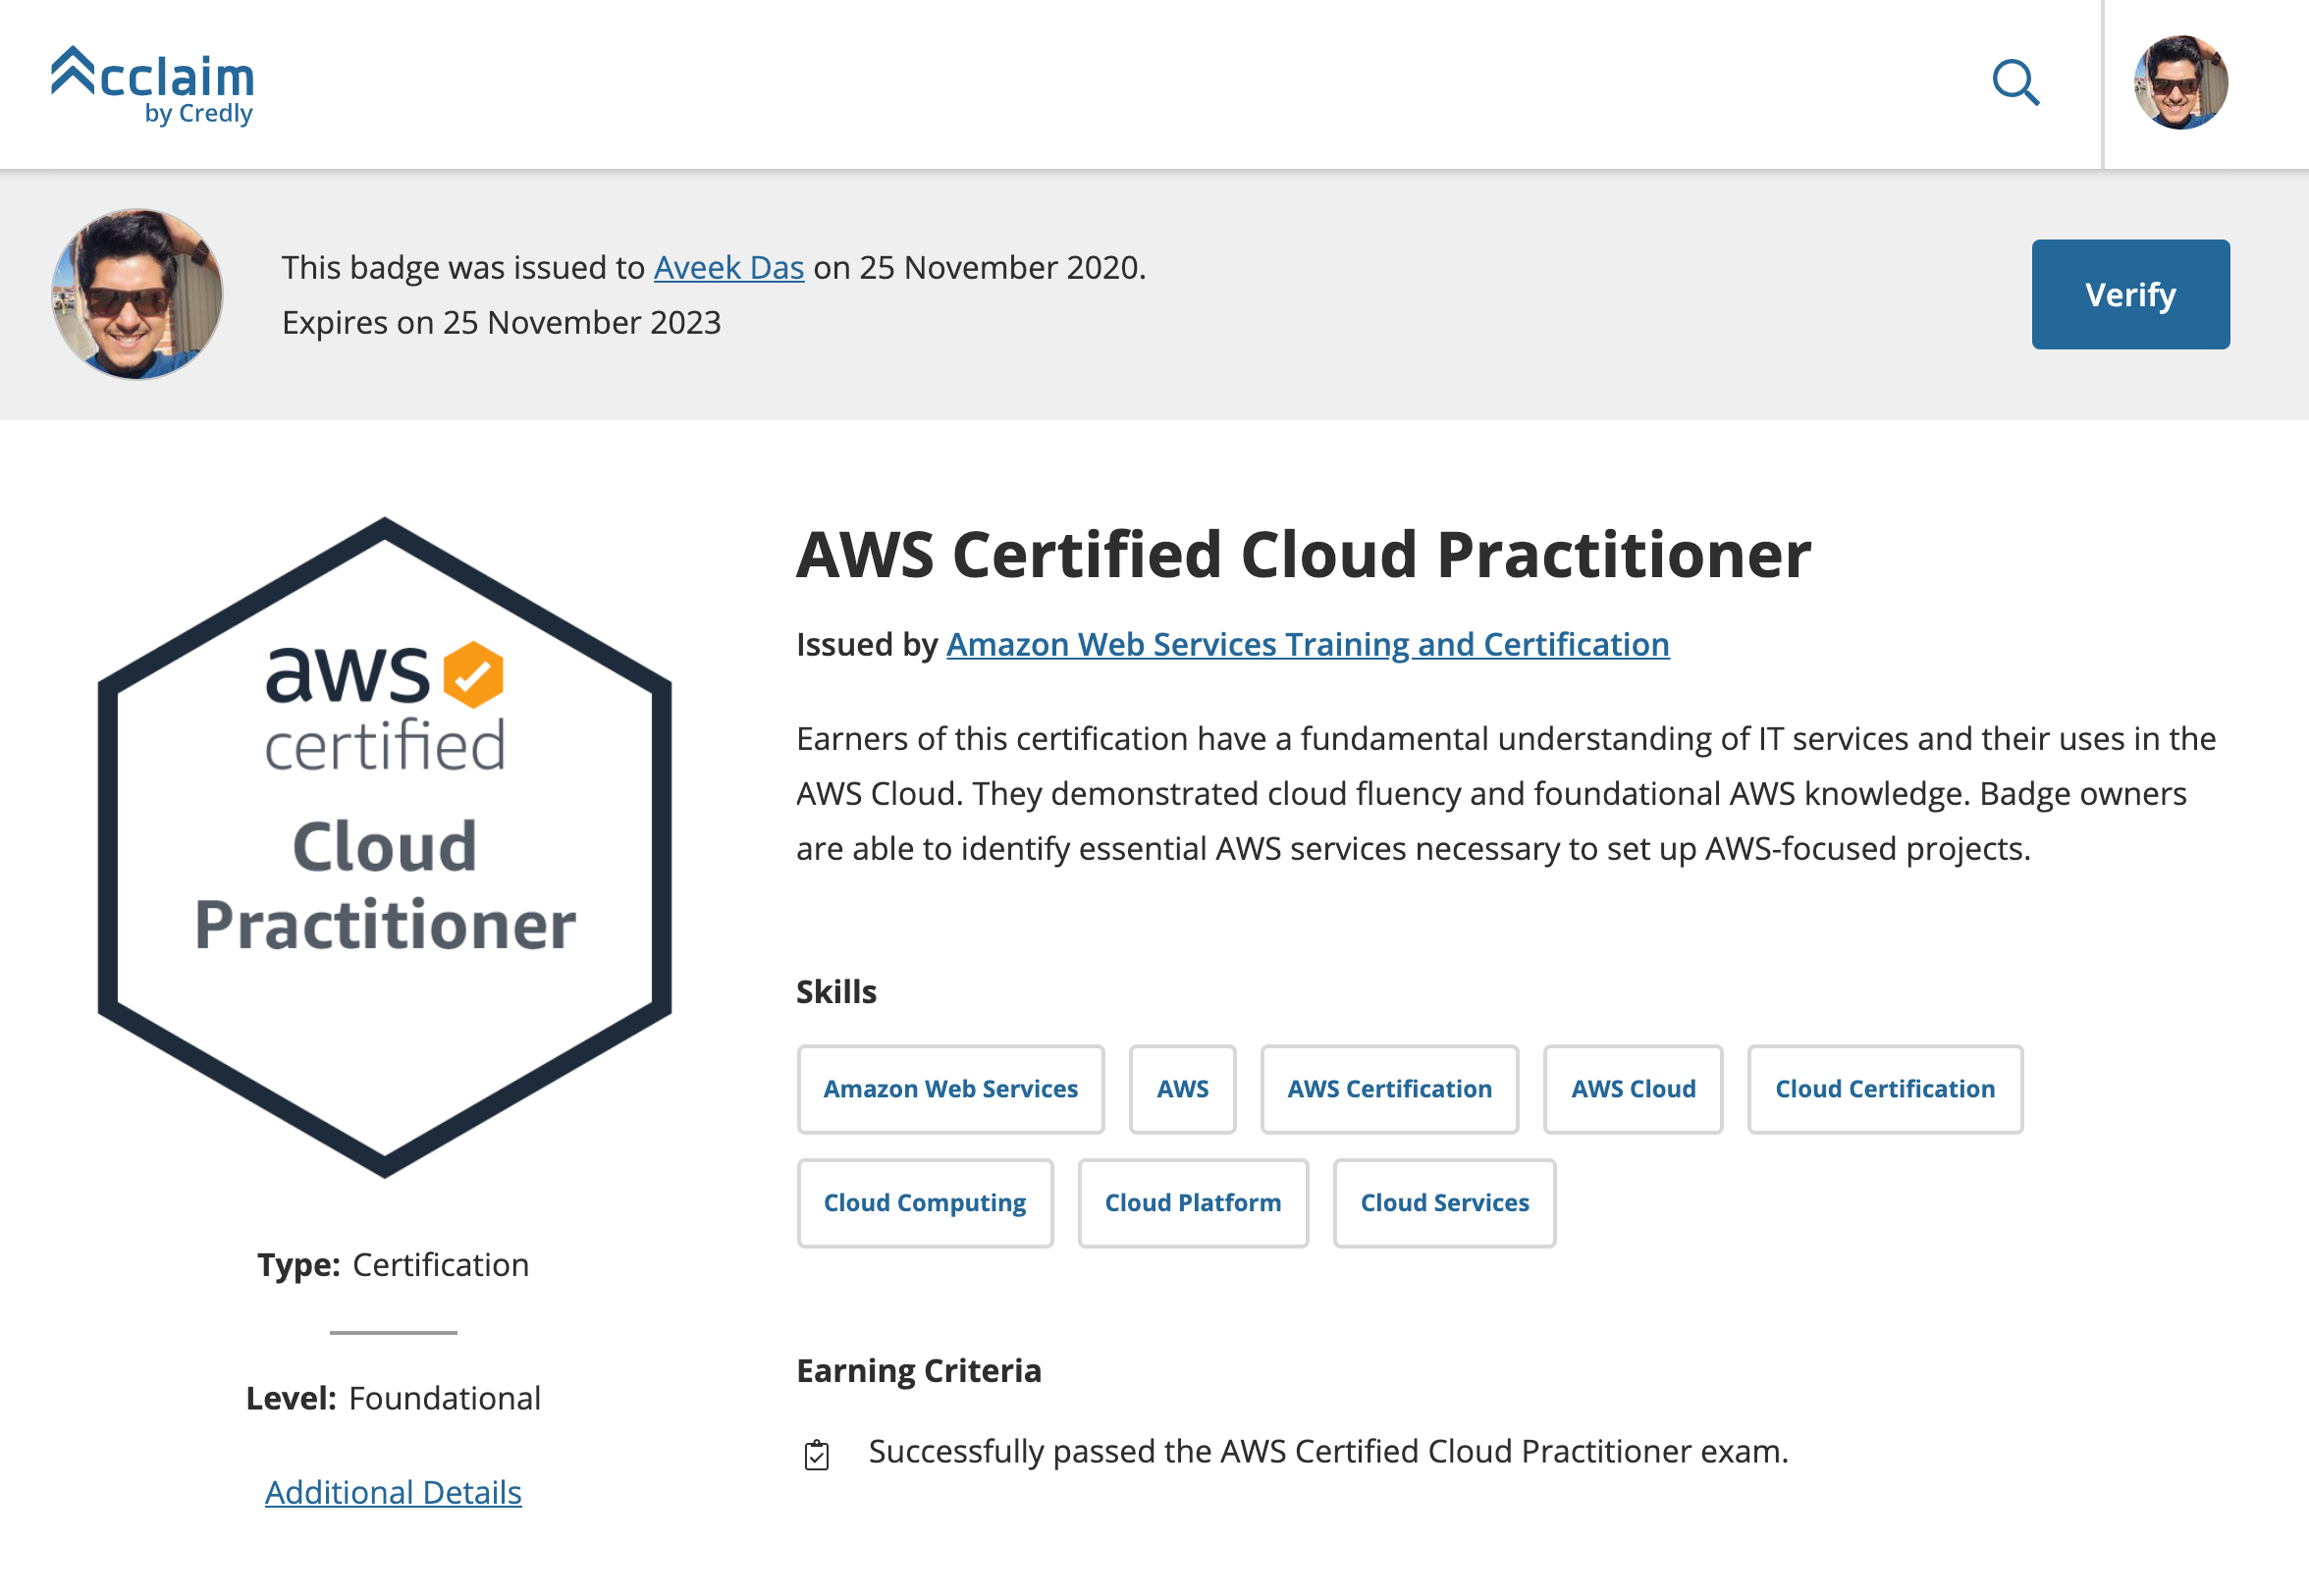 Passed the AWS Certified Cloud Practitioner Exam